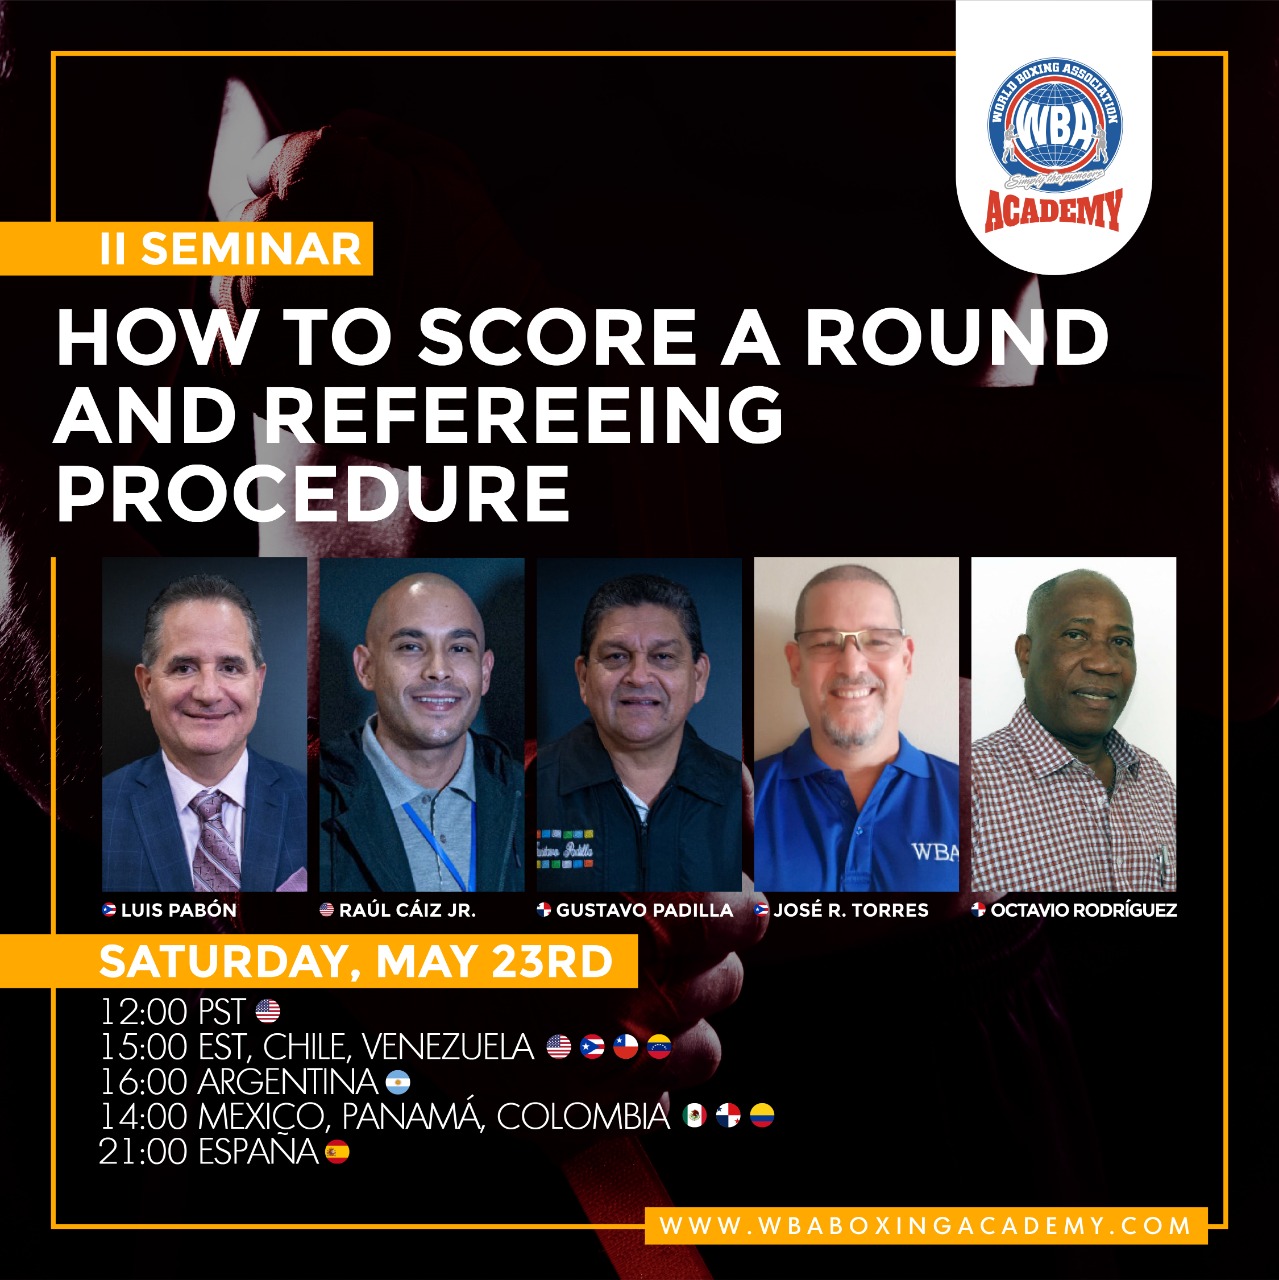 WBA Academy to hold second Judges and Referees seminar this Saturday